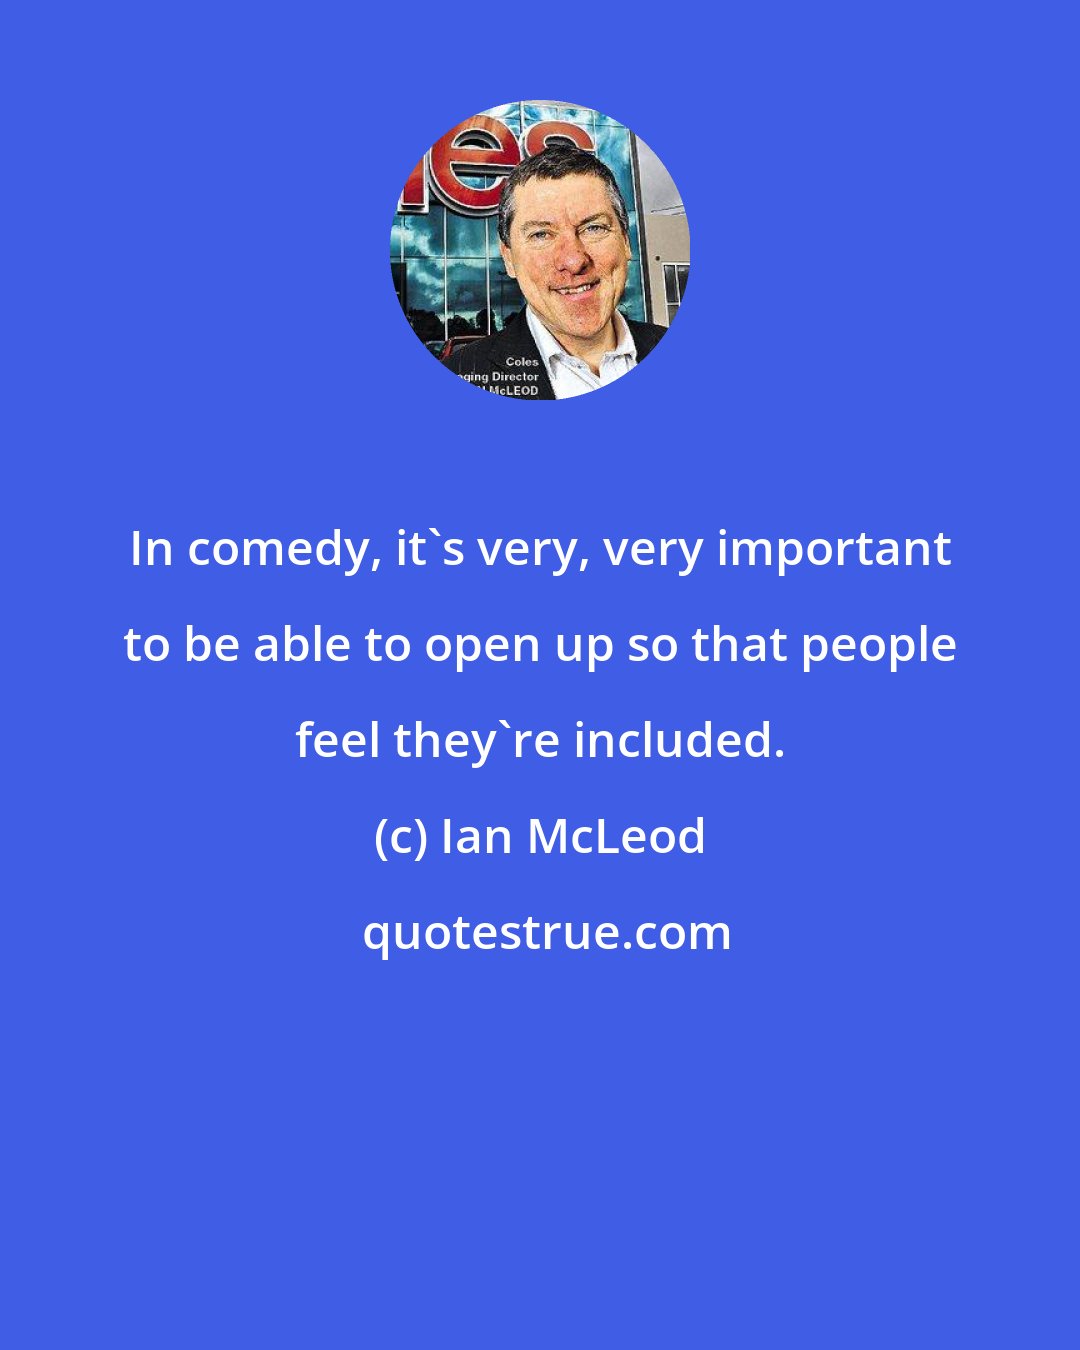 Ian McLeod: In comedy, it's very, very important to be able to open up so that people feel they're included.